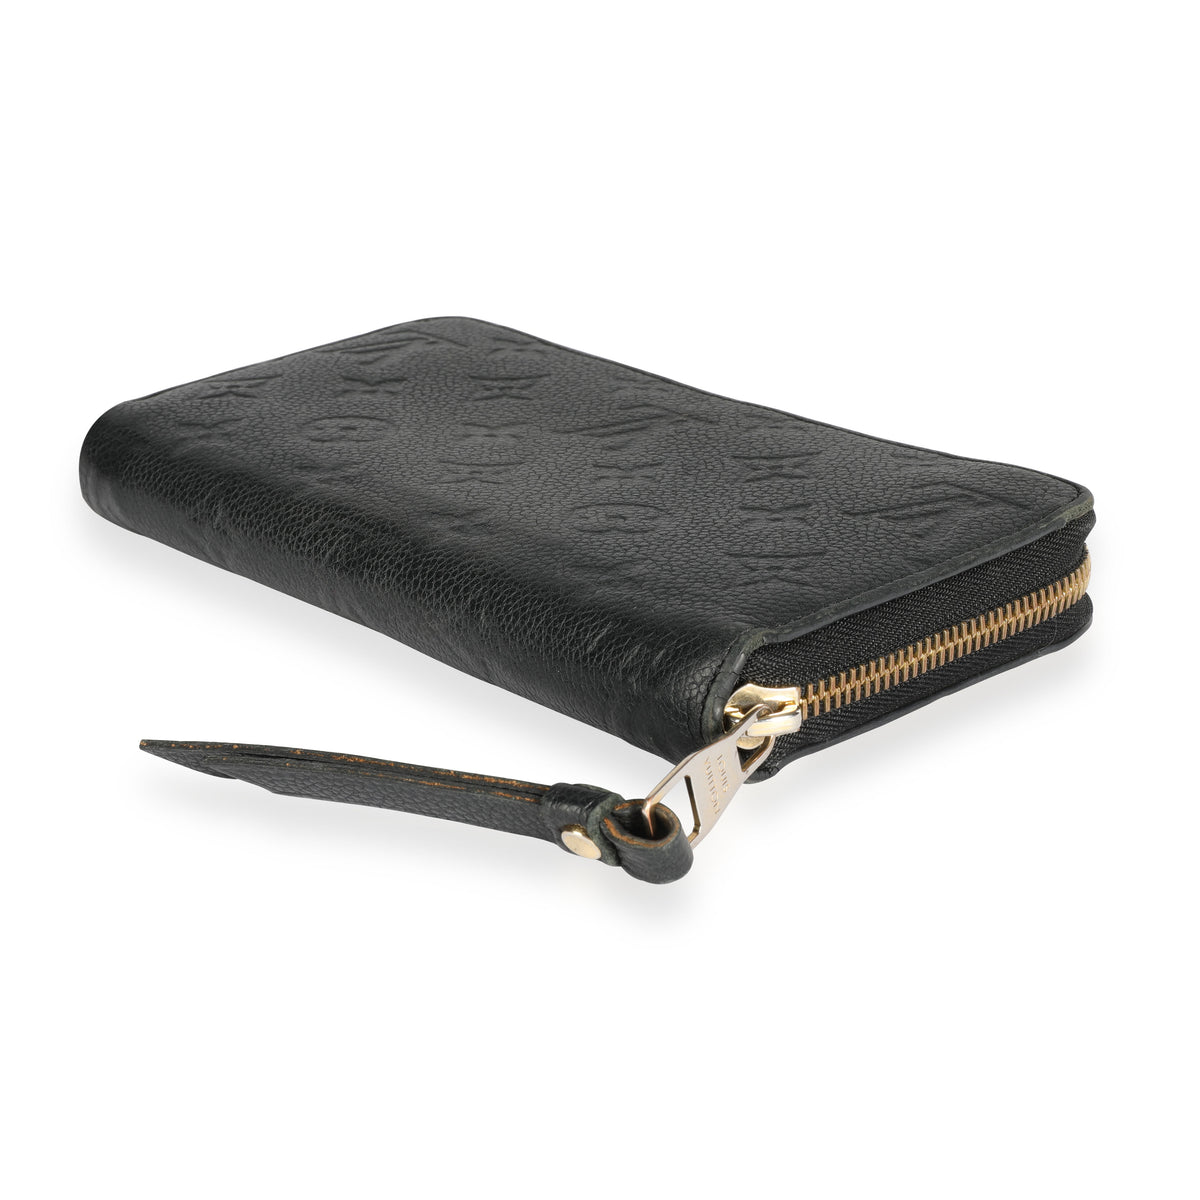 Easy Pouch Monogram Empreinte Leather - Wallets and Small Leather Goods